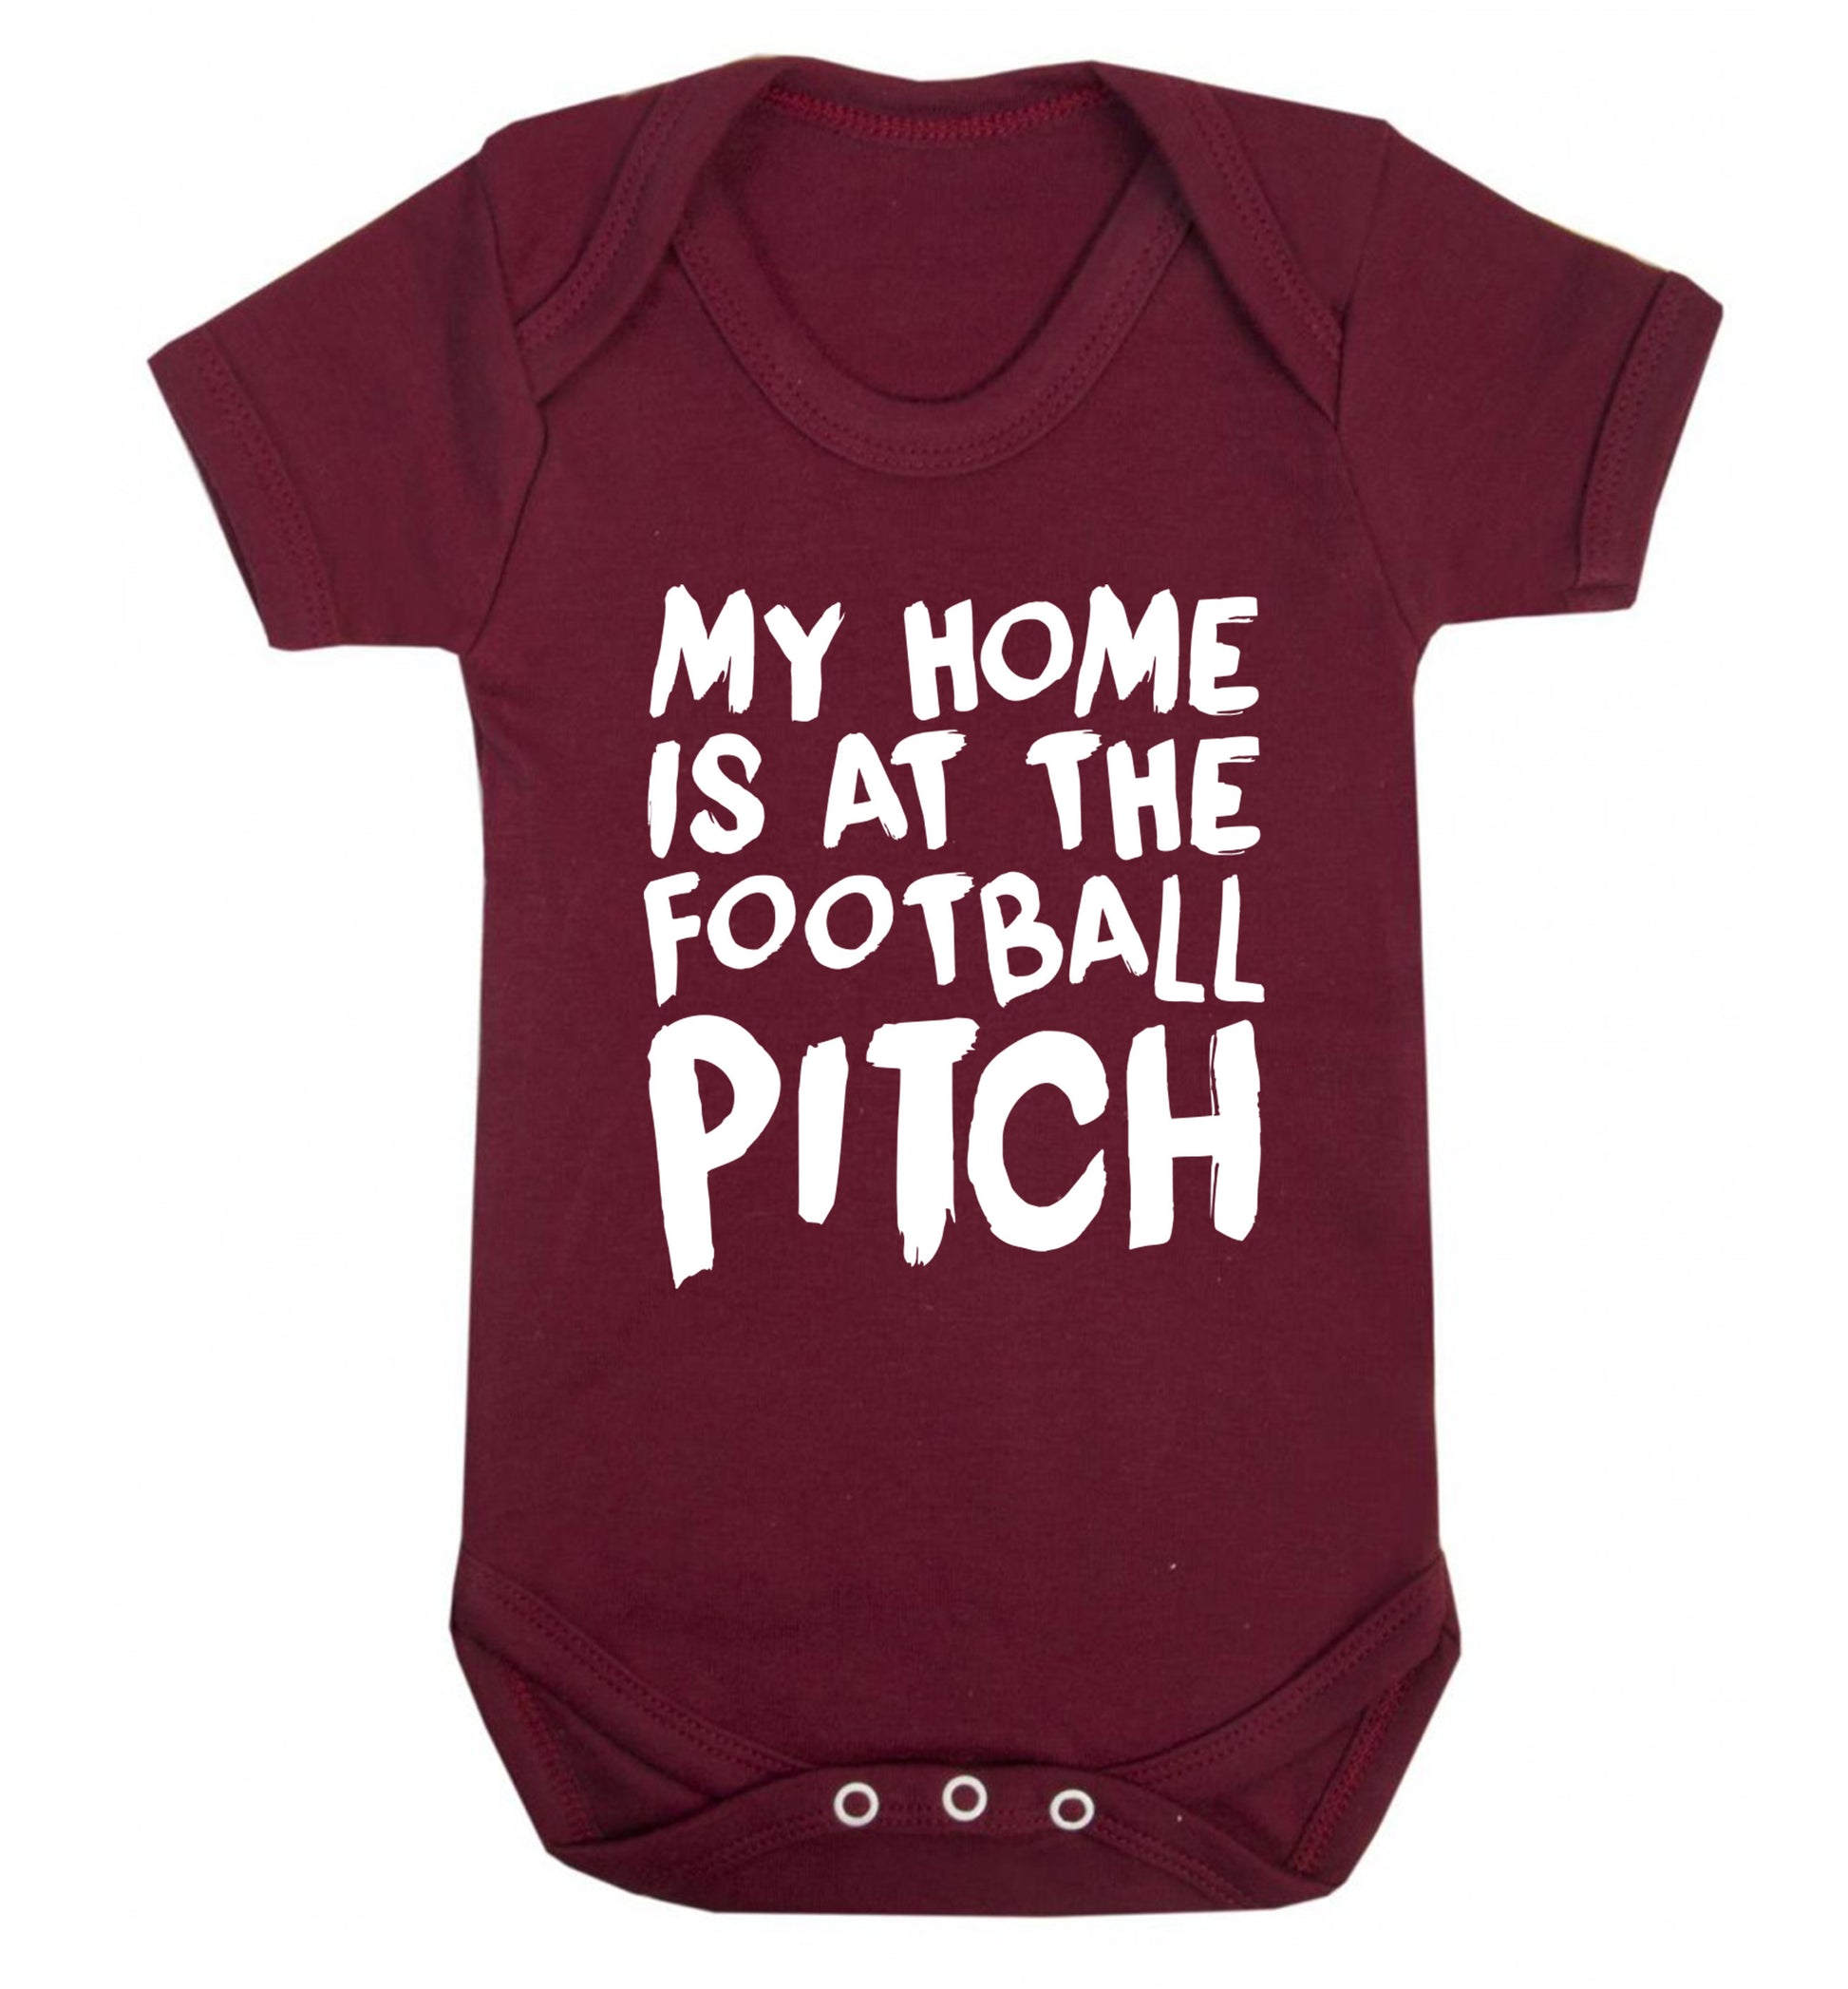 My home is at the football pitch Baby Vest maroon 18-24 months